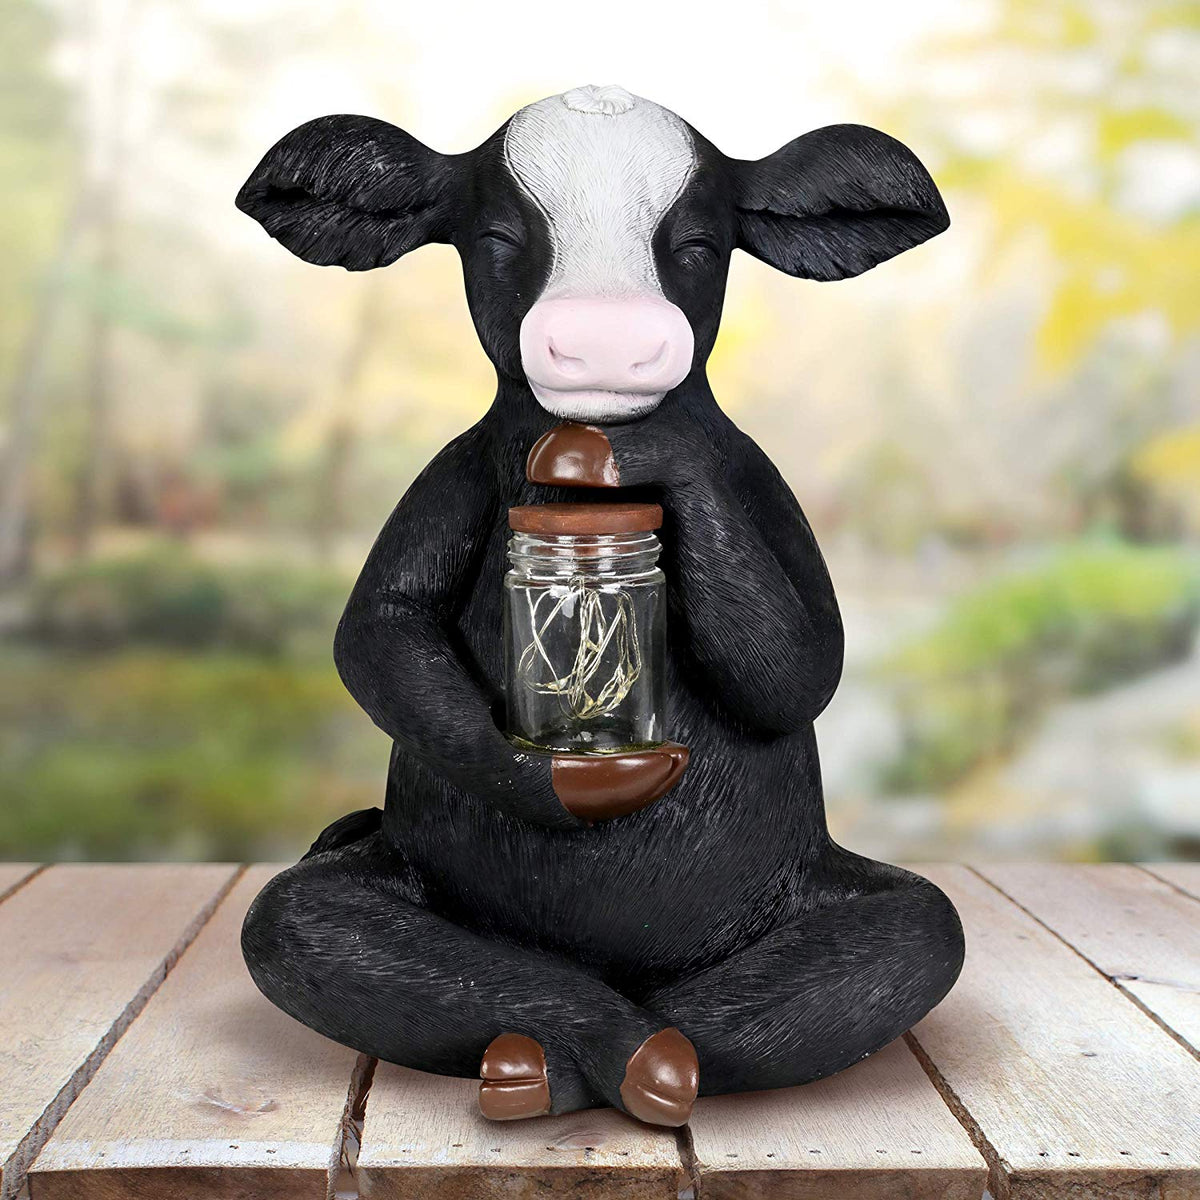 Exhart 13708 Solar Cow Garden Statue with LED Firefly Lights Glass Jar